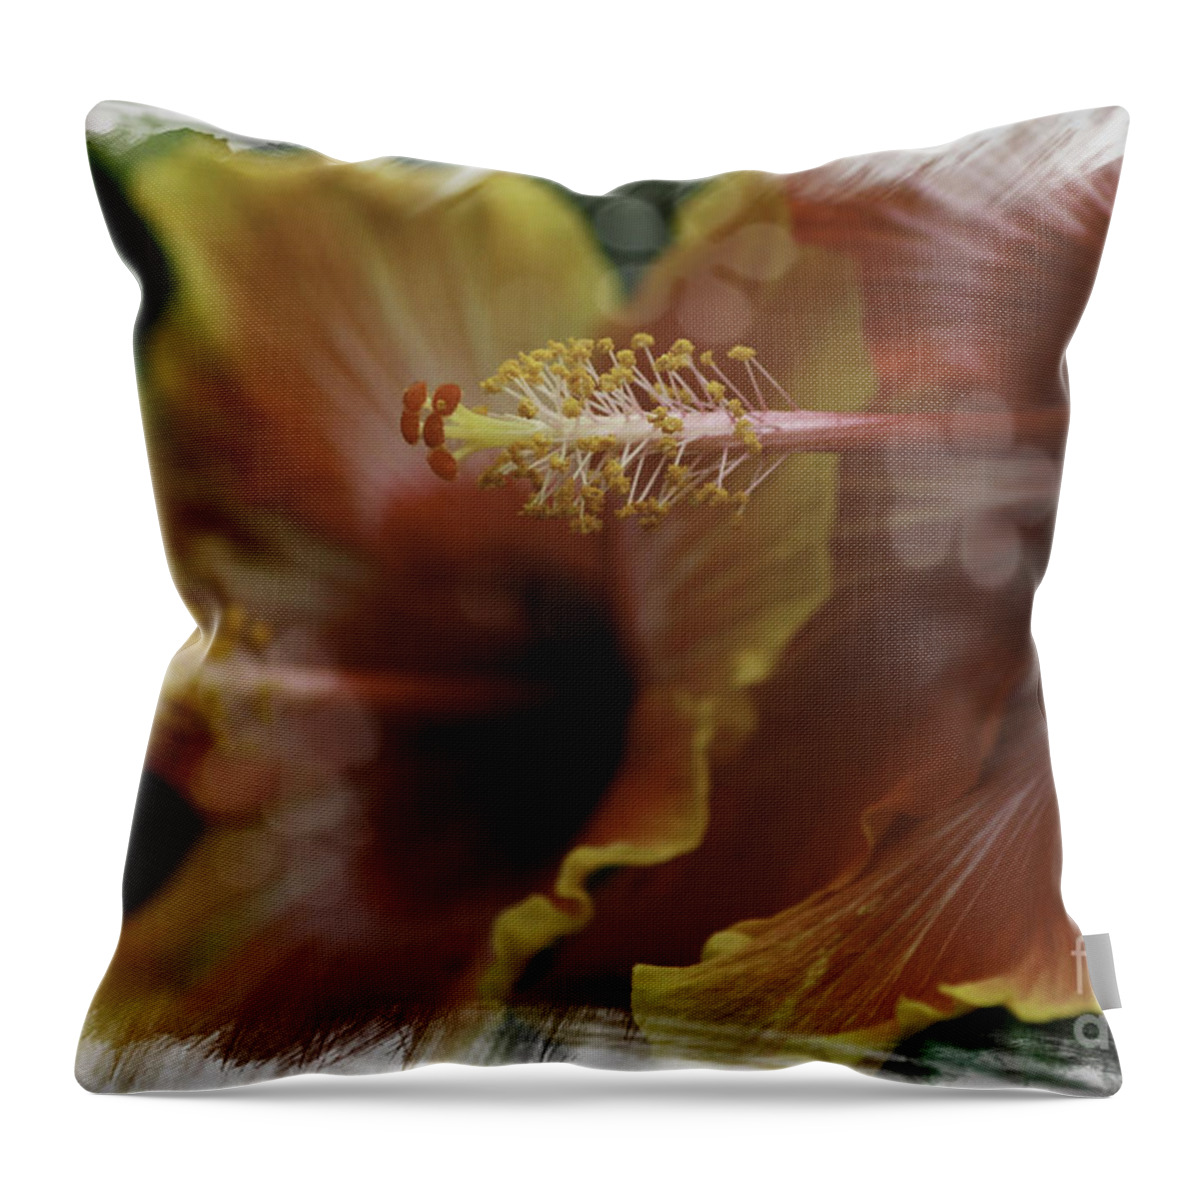 Hibiscus Throw Pillow featuring the photograph Hippi Hibiscus by Lori Mellen-Pagliaro